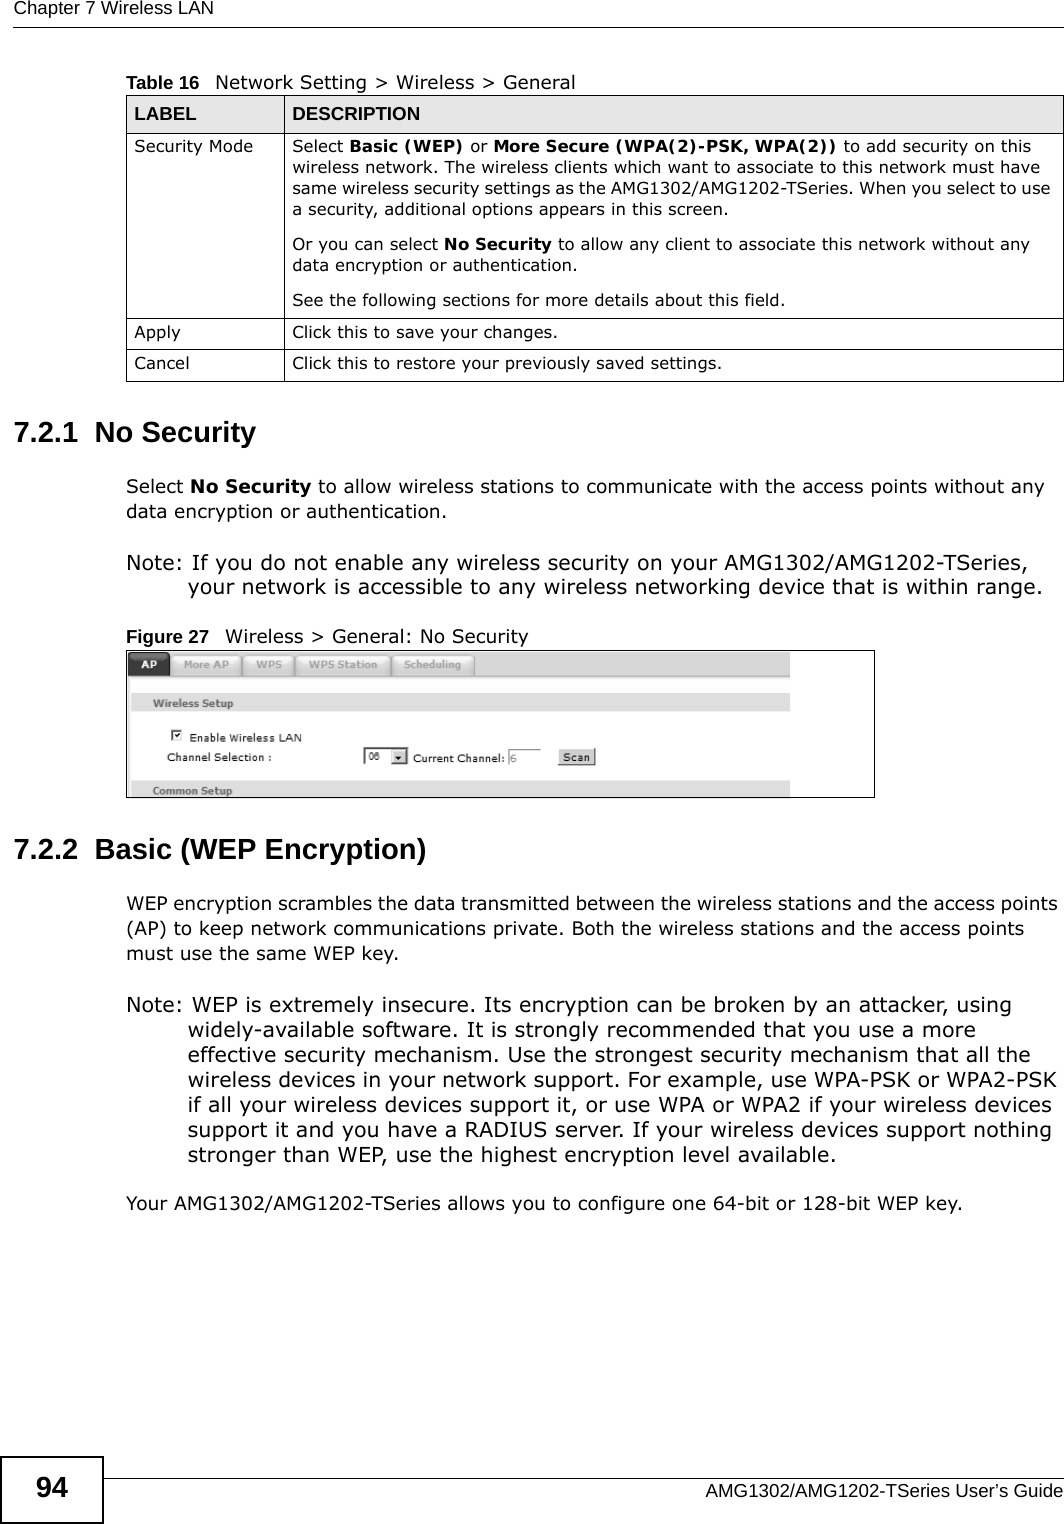 Chapter 7 Wireless LANAMG1302/AMG1202-TSeries User’s Guide947.2.1  No SecuritySelect No Security to allow wireless stations to communicate with the access points without any data encryption or authentication.Note: If you do not enable any wireless security on your AMG1302/AMG1202-TSeries, your network is accessible to any wireless networking device that is within range.Figure 27   Wireless &gt; General: No Security7.2.2  Basic (WEP Encryption)WEP encryption scrambles the data transmitted between the wireless stations and the access points (AP) to keep network communications private. Both the wireless stations and the access points must use the same WEP key.Note: WEP is extremely insecure. Its encryption can be broken by an attacker, using widely-available software. It is strongly recommended that you use a more effective security mechanism. Use the strongest security mechanism that all the wireless devices in your network support. For example, use WPA-PSK or WPA2-PSK if all your wireless devices support it, or use WPA or WPA2 if your wireless devices support it and you have a RADIUS server. If your wireless devices support nothing stronger than WEP, use the highest encryption level available.Your AMG1302/AMG1202-TSeries allows you to configure one 64-bit or 128-bit WEP key.Security Mode Select Basic (WEP) or More Secure (WPA(2)-PSK, WPA(2)) to add security on this wireless network. The wireless clients which want to associate to this network must have same wireless security settings as the AMG1302/AMG1202-TSeries. When you select to use a security, additional options appears in this screen. Or you can select No Security to allow any client to associate this network without any data encryption or authentication.See the following sections for more details about this field.Apply Click this to save your changes.Cancel Click this to restore your previously saved settings.Table 16   Network Setting &gt; Wireless &gt; GeneralLABEL DESCRIPTION